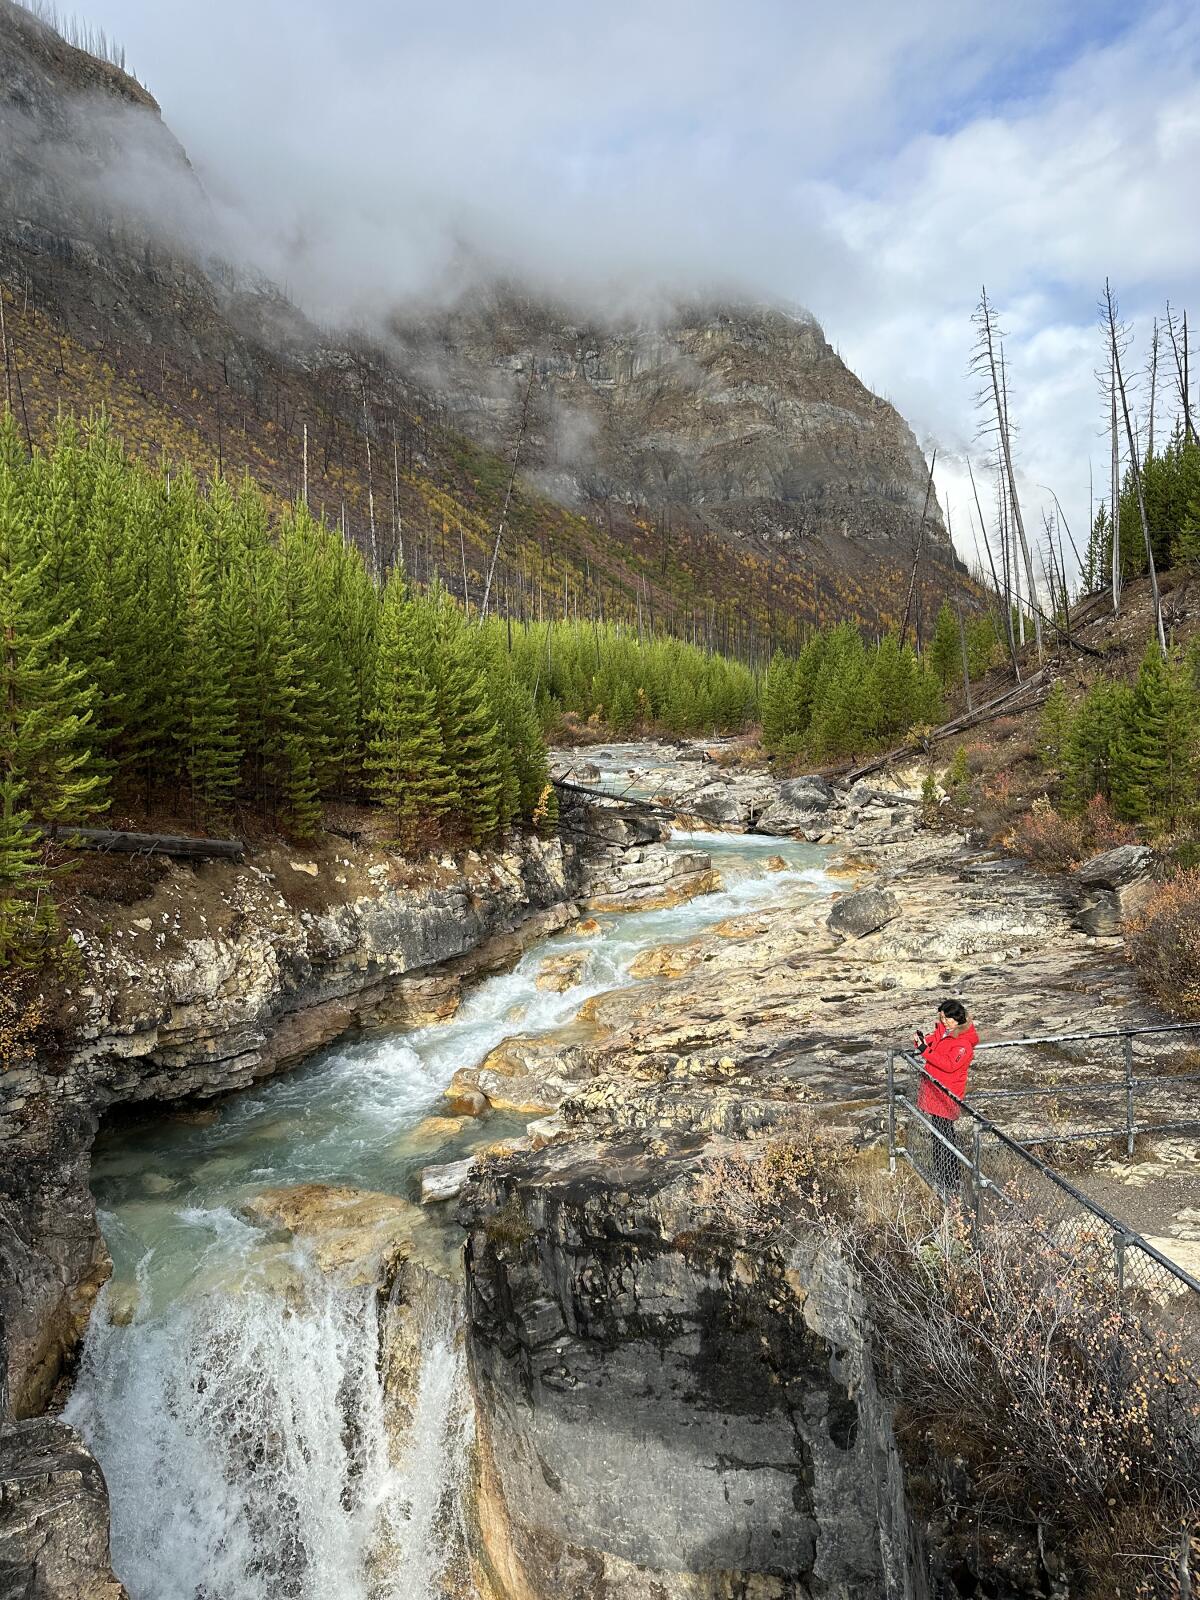 Marble Canyon is a marble-walled gorge in Canada’s Kootenay National Park.